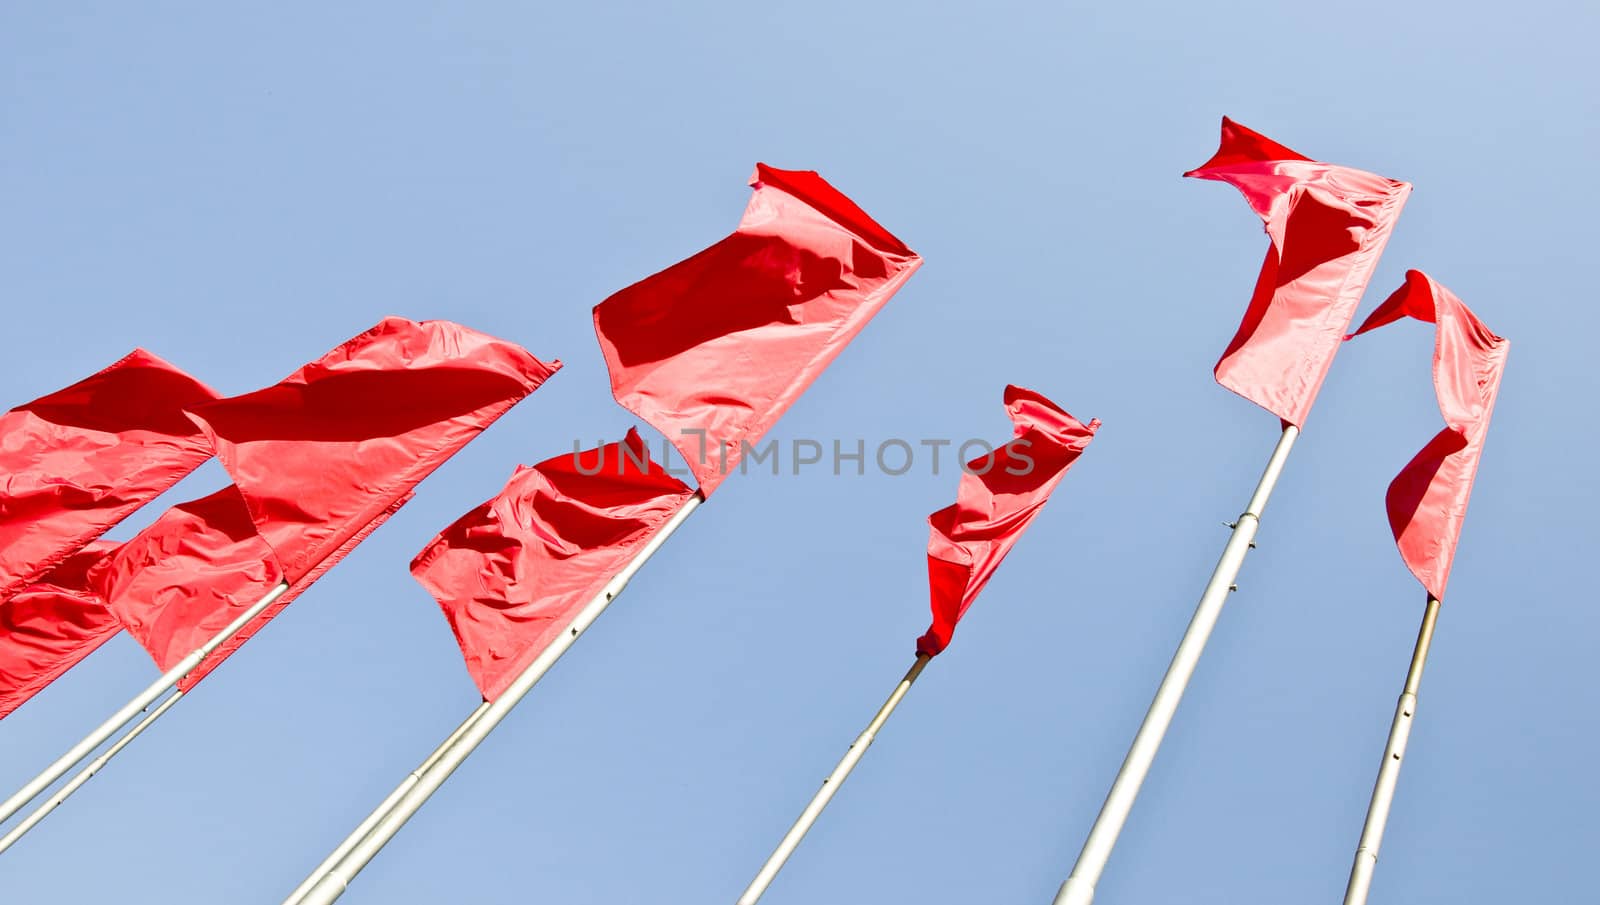 Red flags fluttered in the wind. Against the background of blue sky.